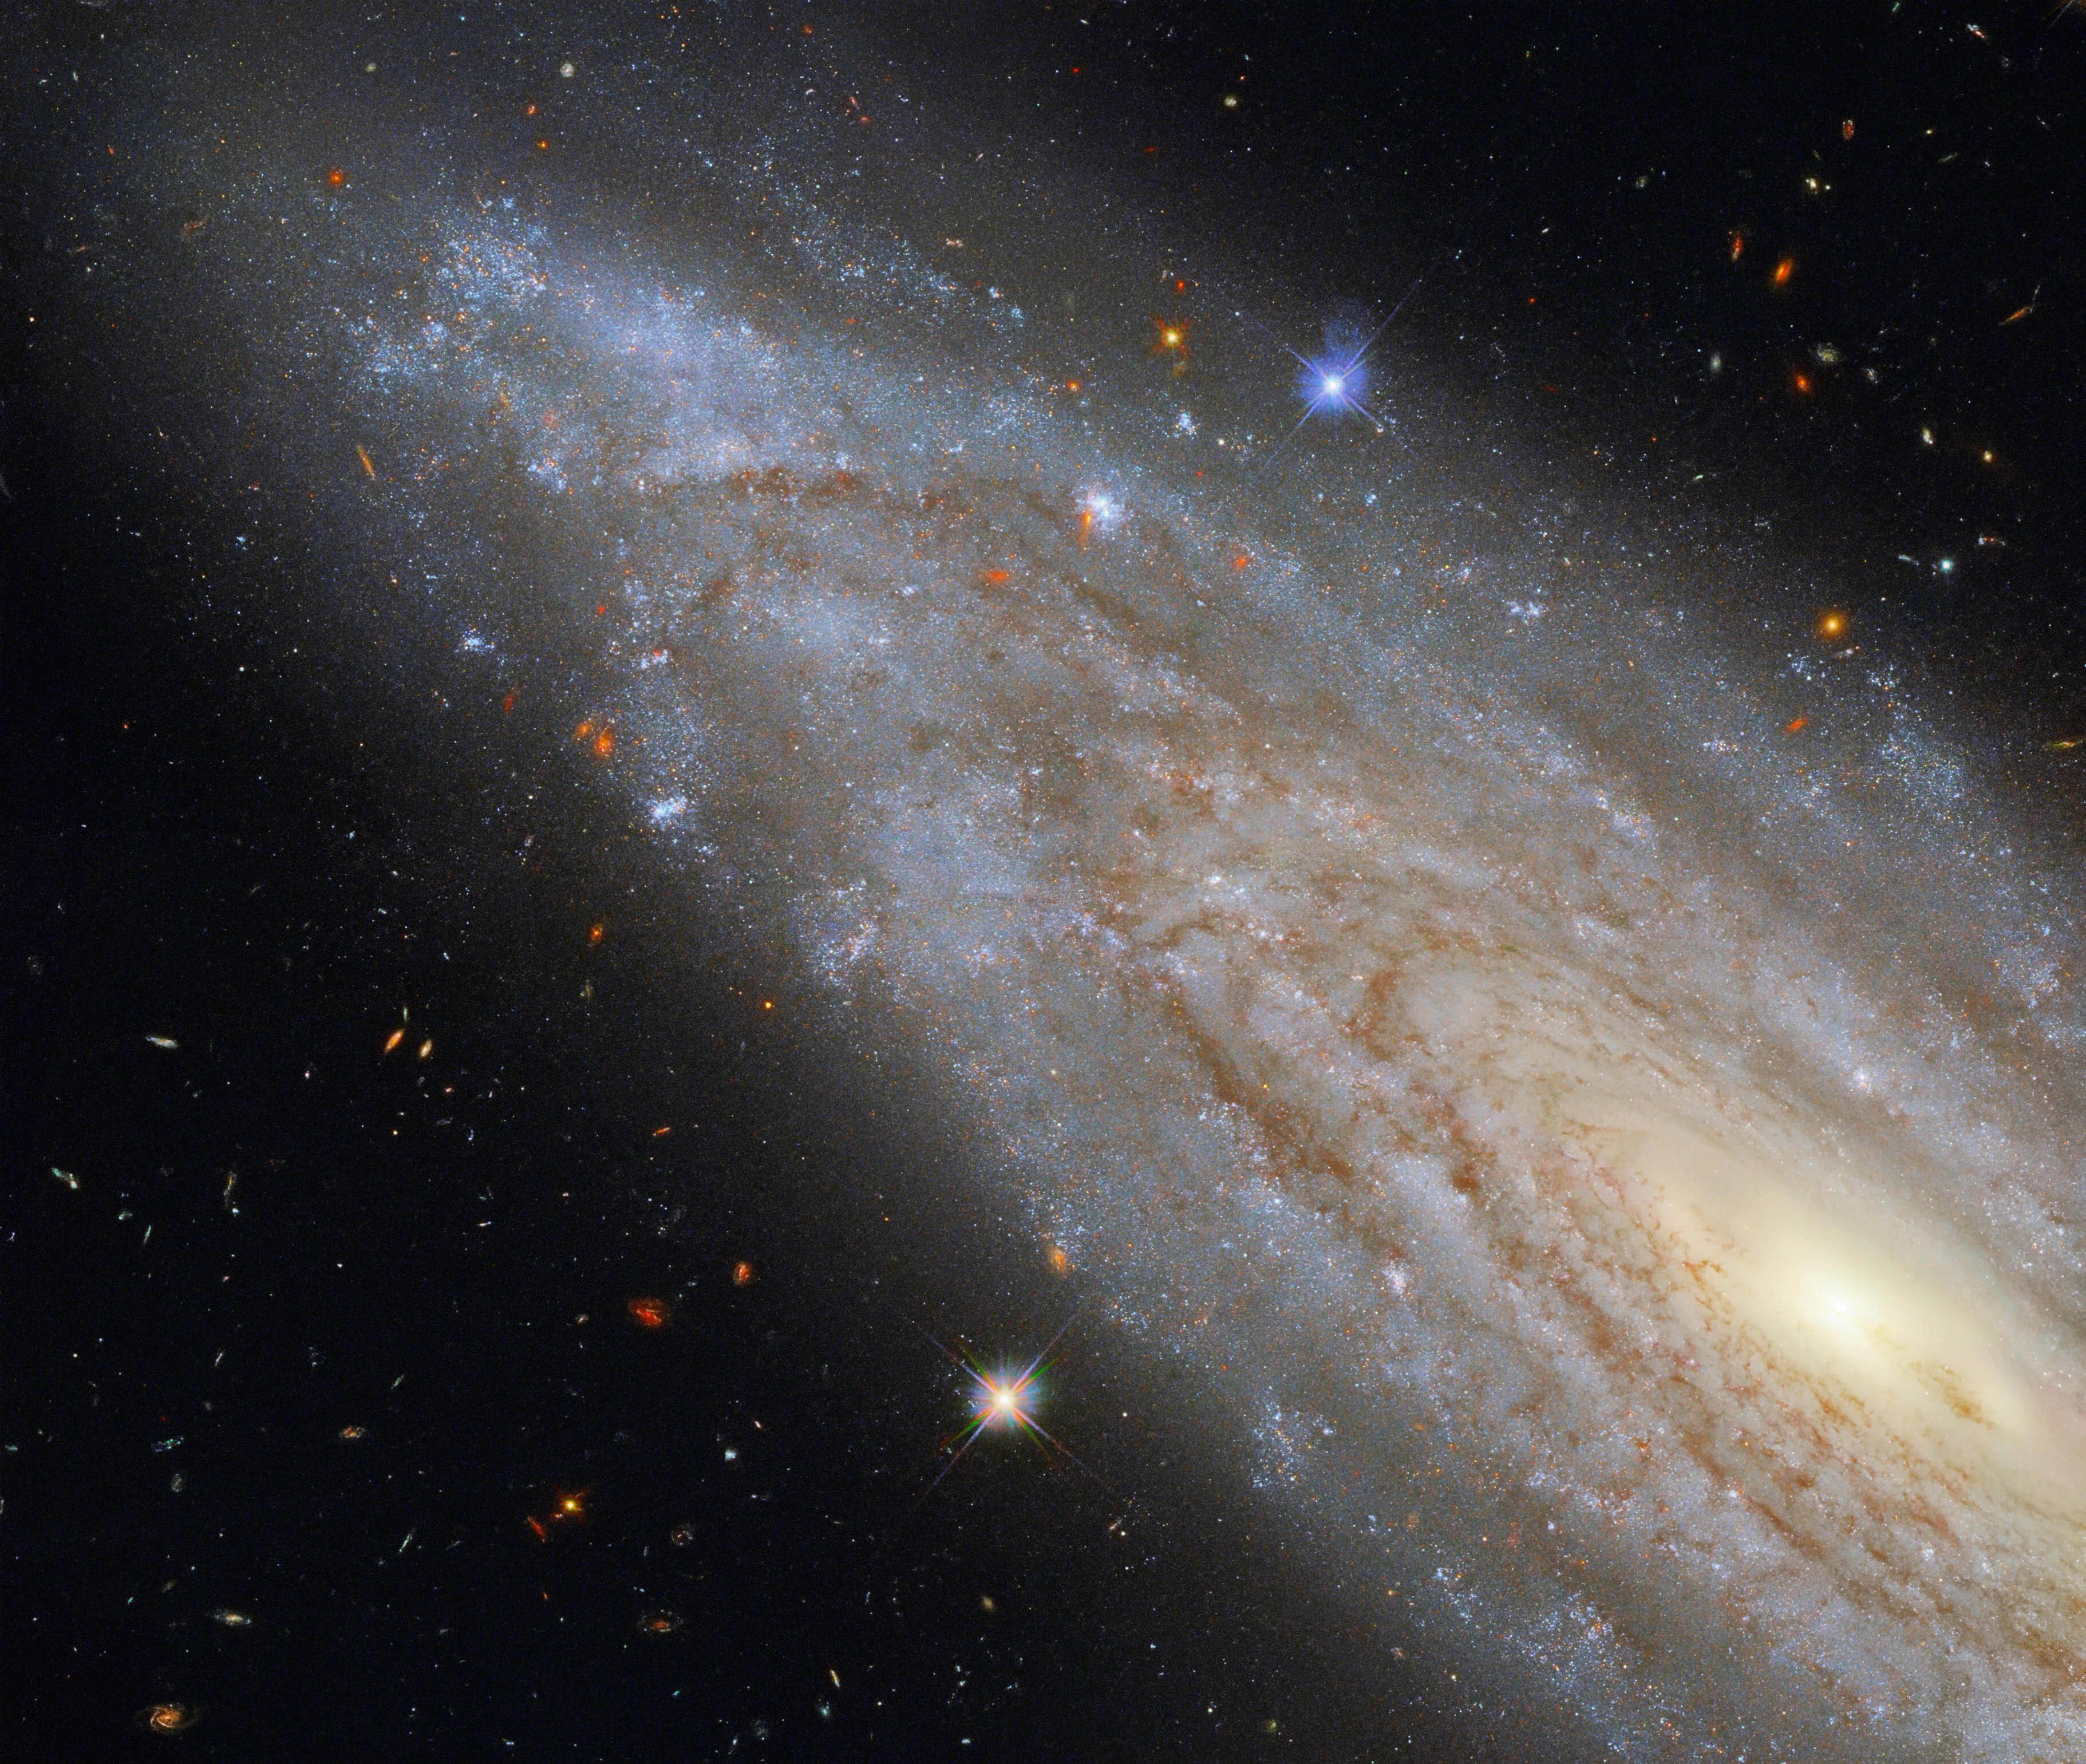 This image shows the spiral galaxy ngc 3254, observed using hubble's wide field camera 3 (wfc3).